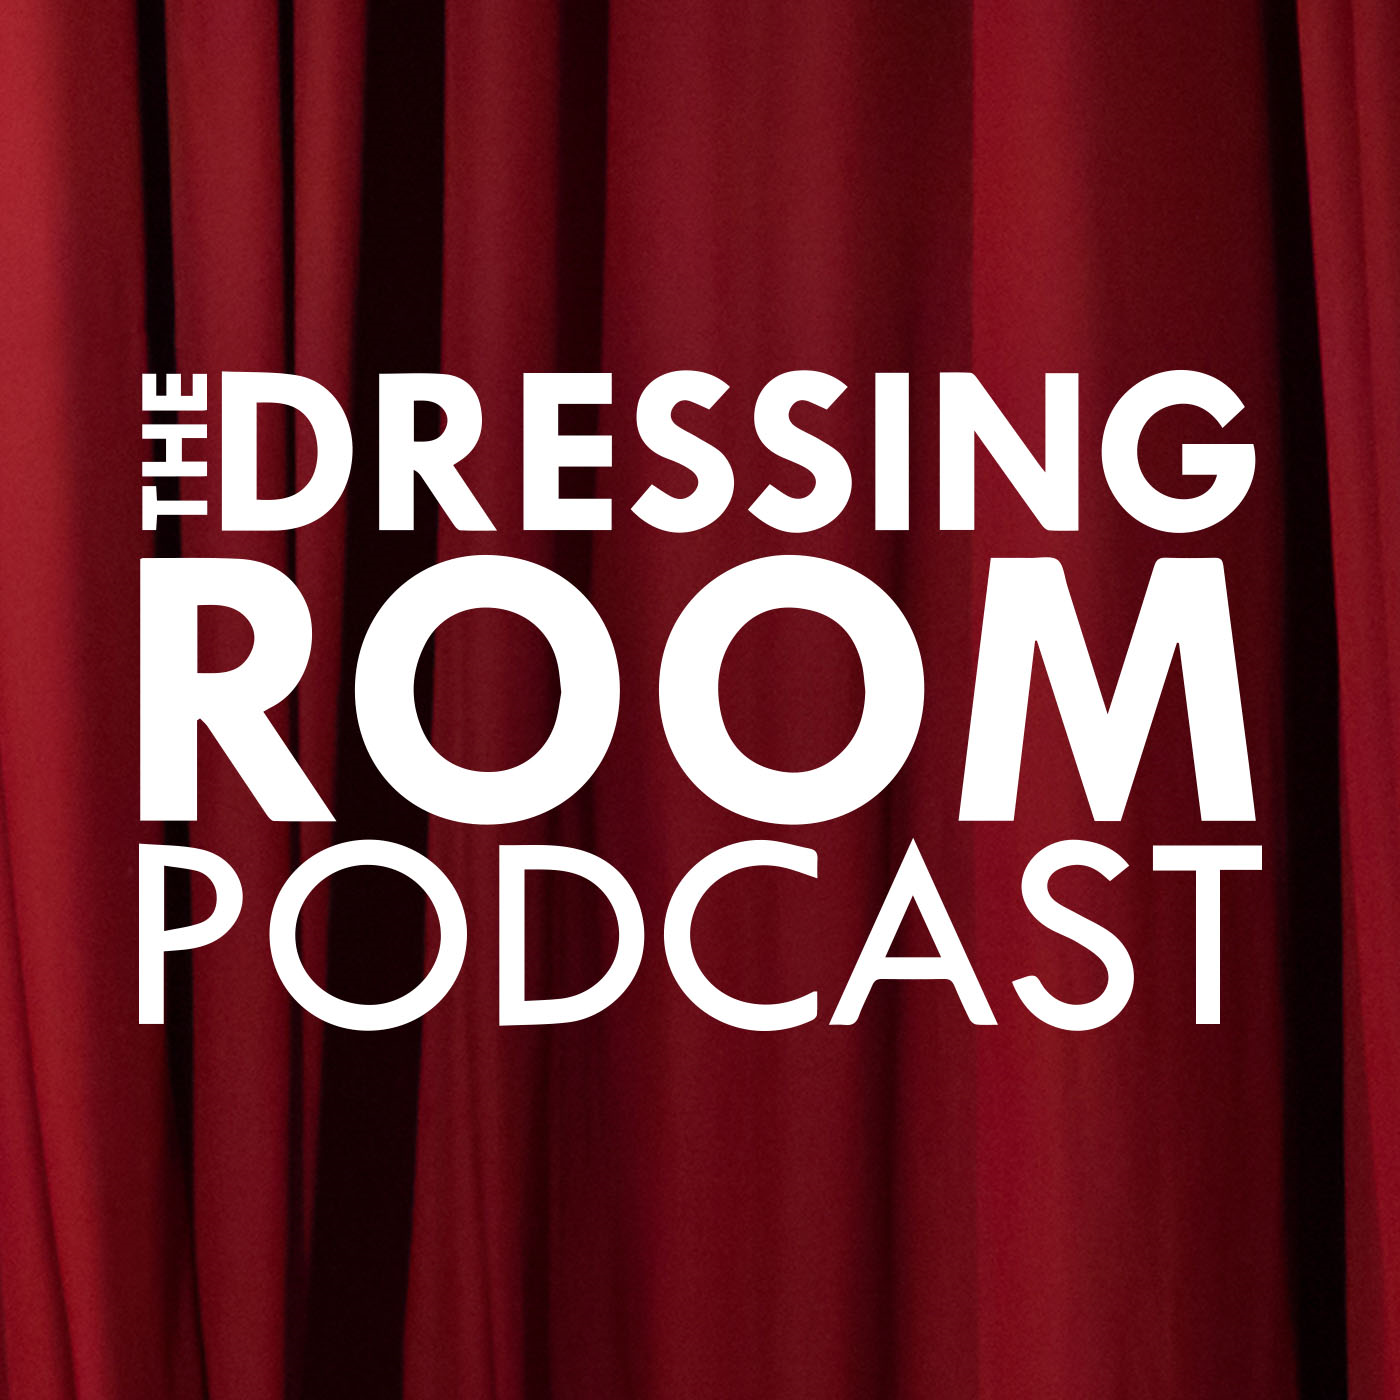 THE DRESSING ROOM PODCAST - EPISODE 2 - TODD MC KENNEY